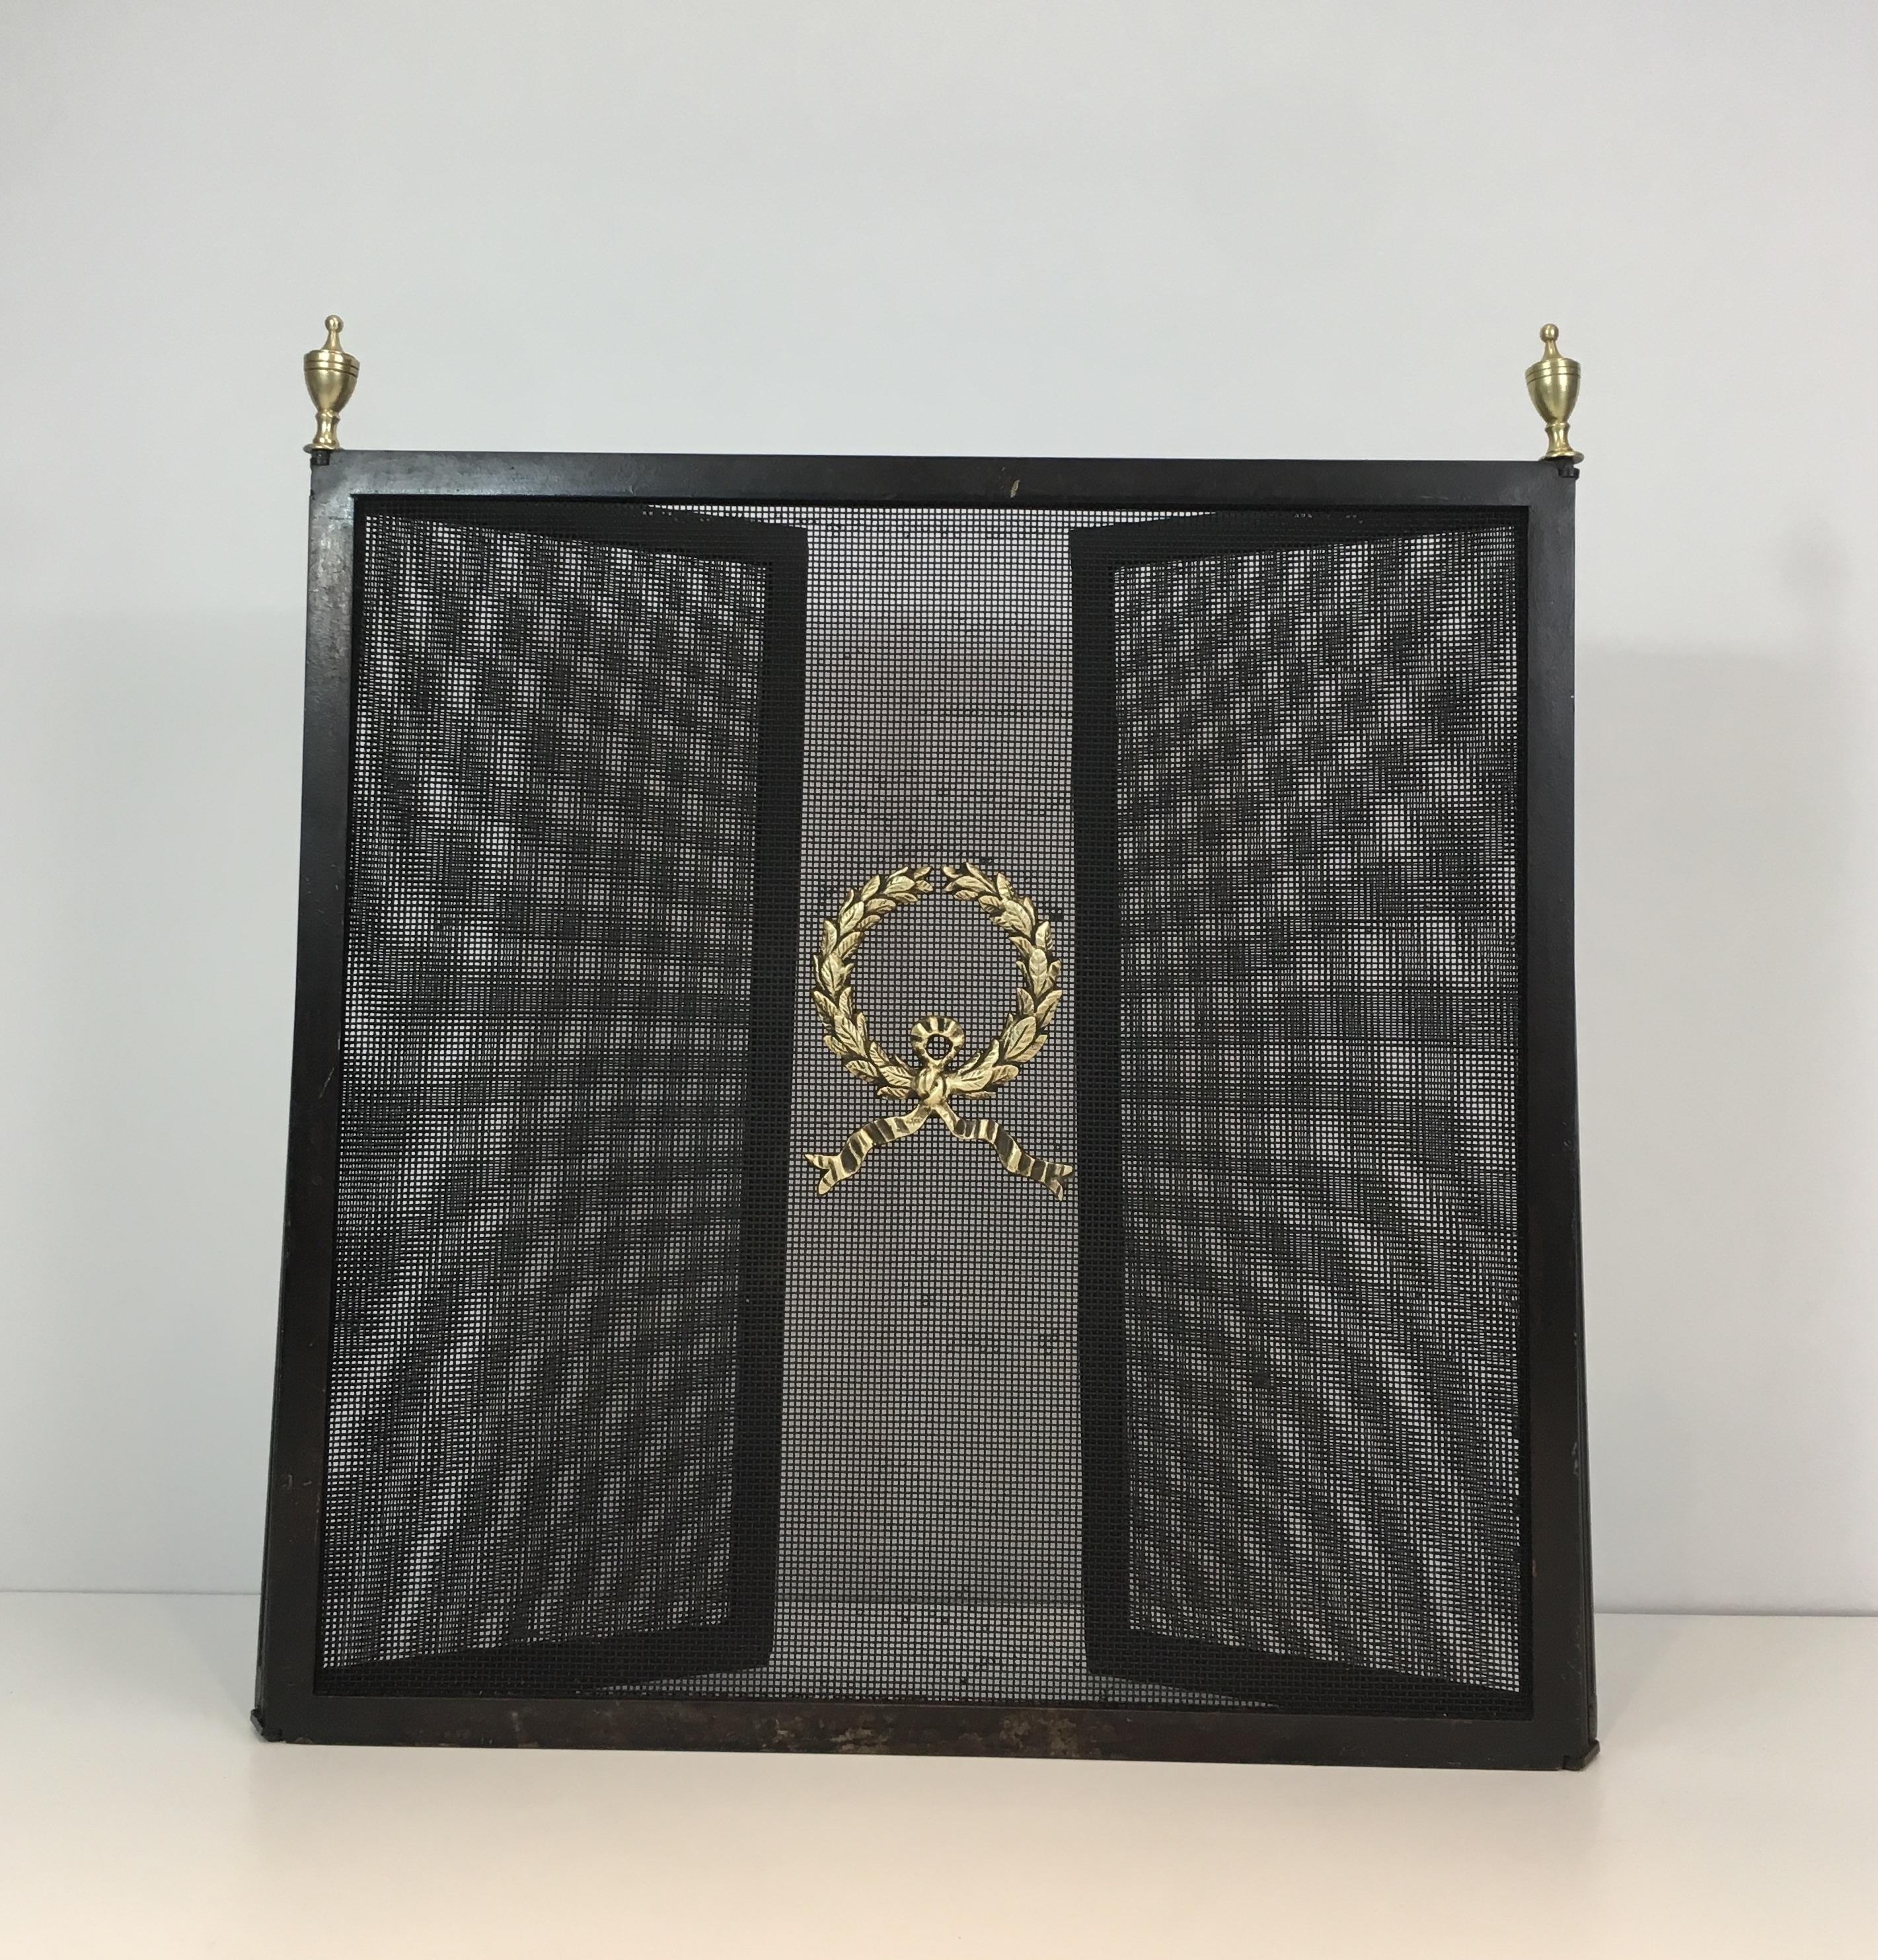  Neoclassical Steel, Bronze, Brass and Grilling Fire Place Screen, French 14